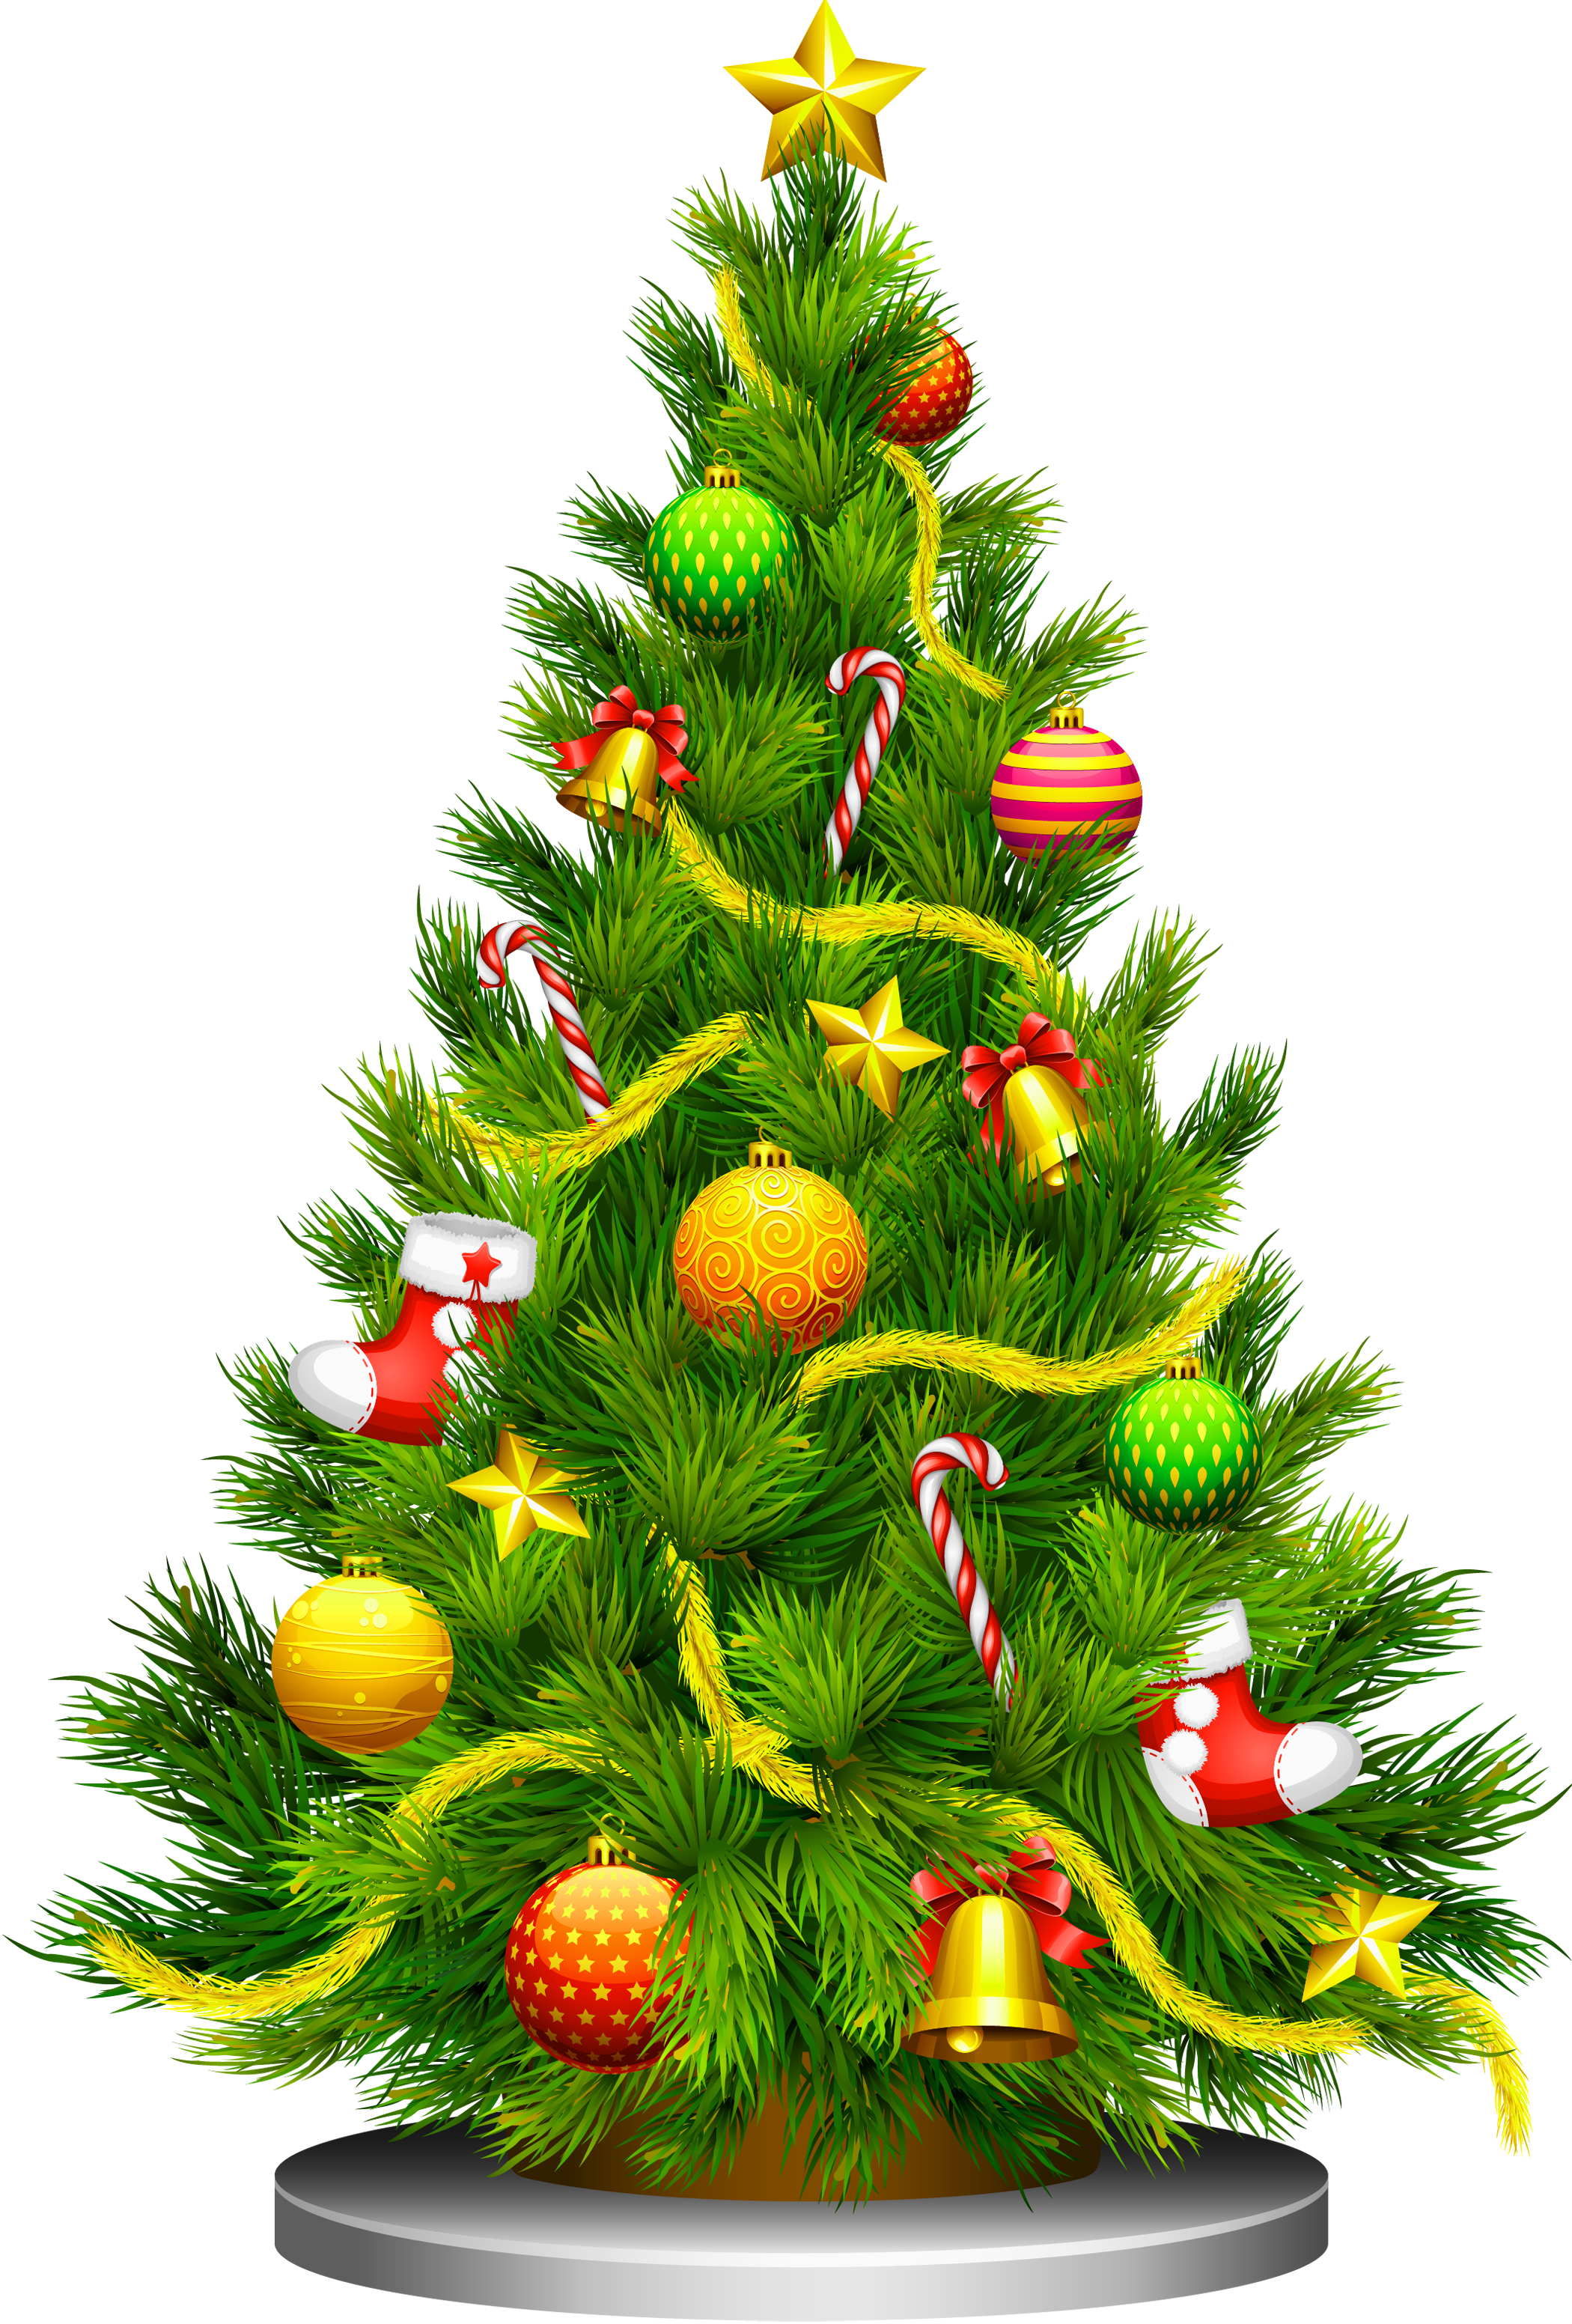 Transparent Christmas Tree Clipart | Gallery Yopriceville - High ...